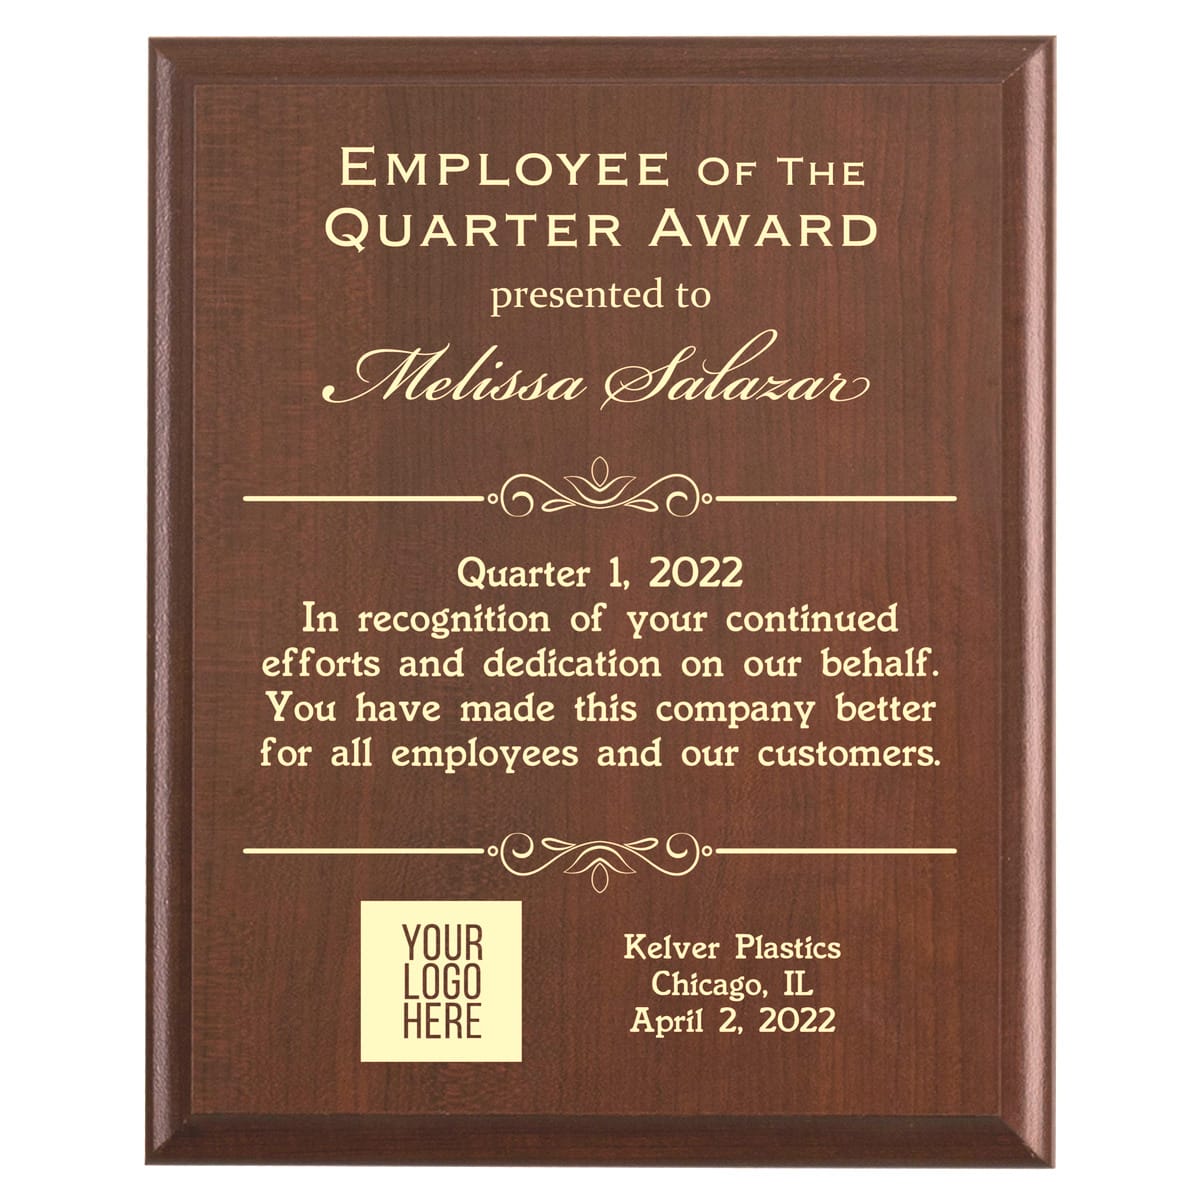 Plaque photo: Employee of the Quarter Award Plaque design with free personalization. Wood style finish with customized text.